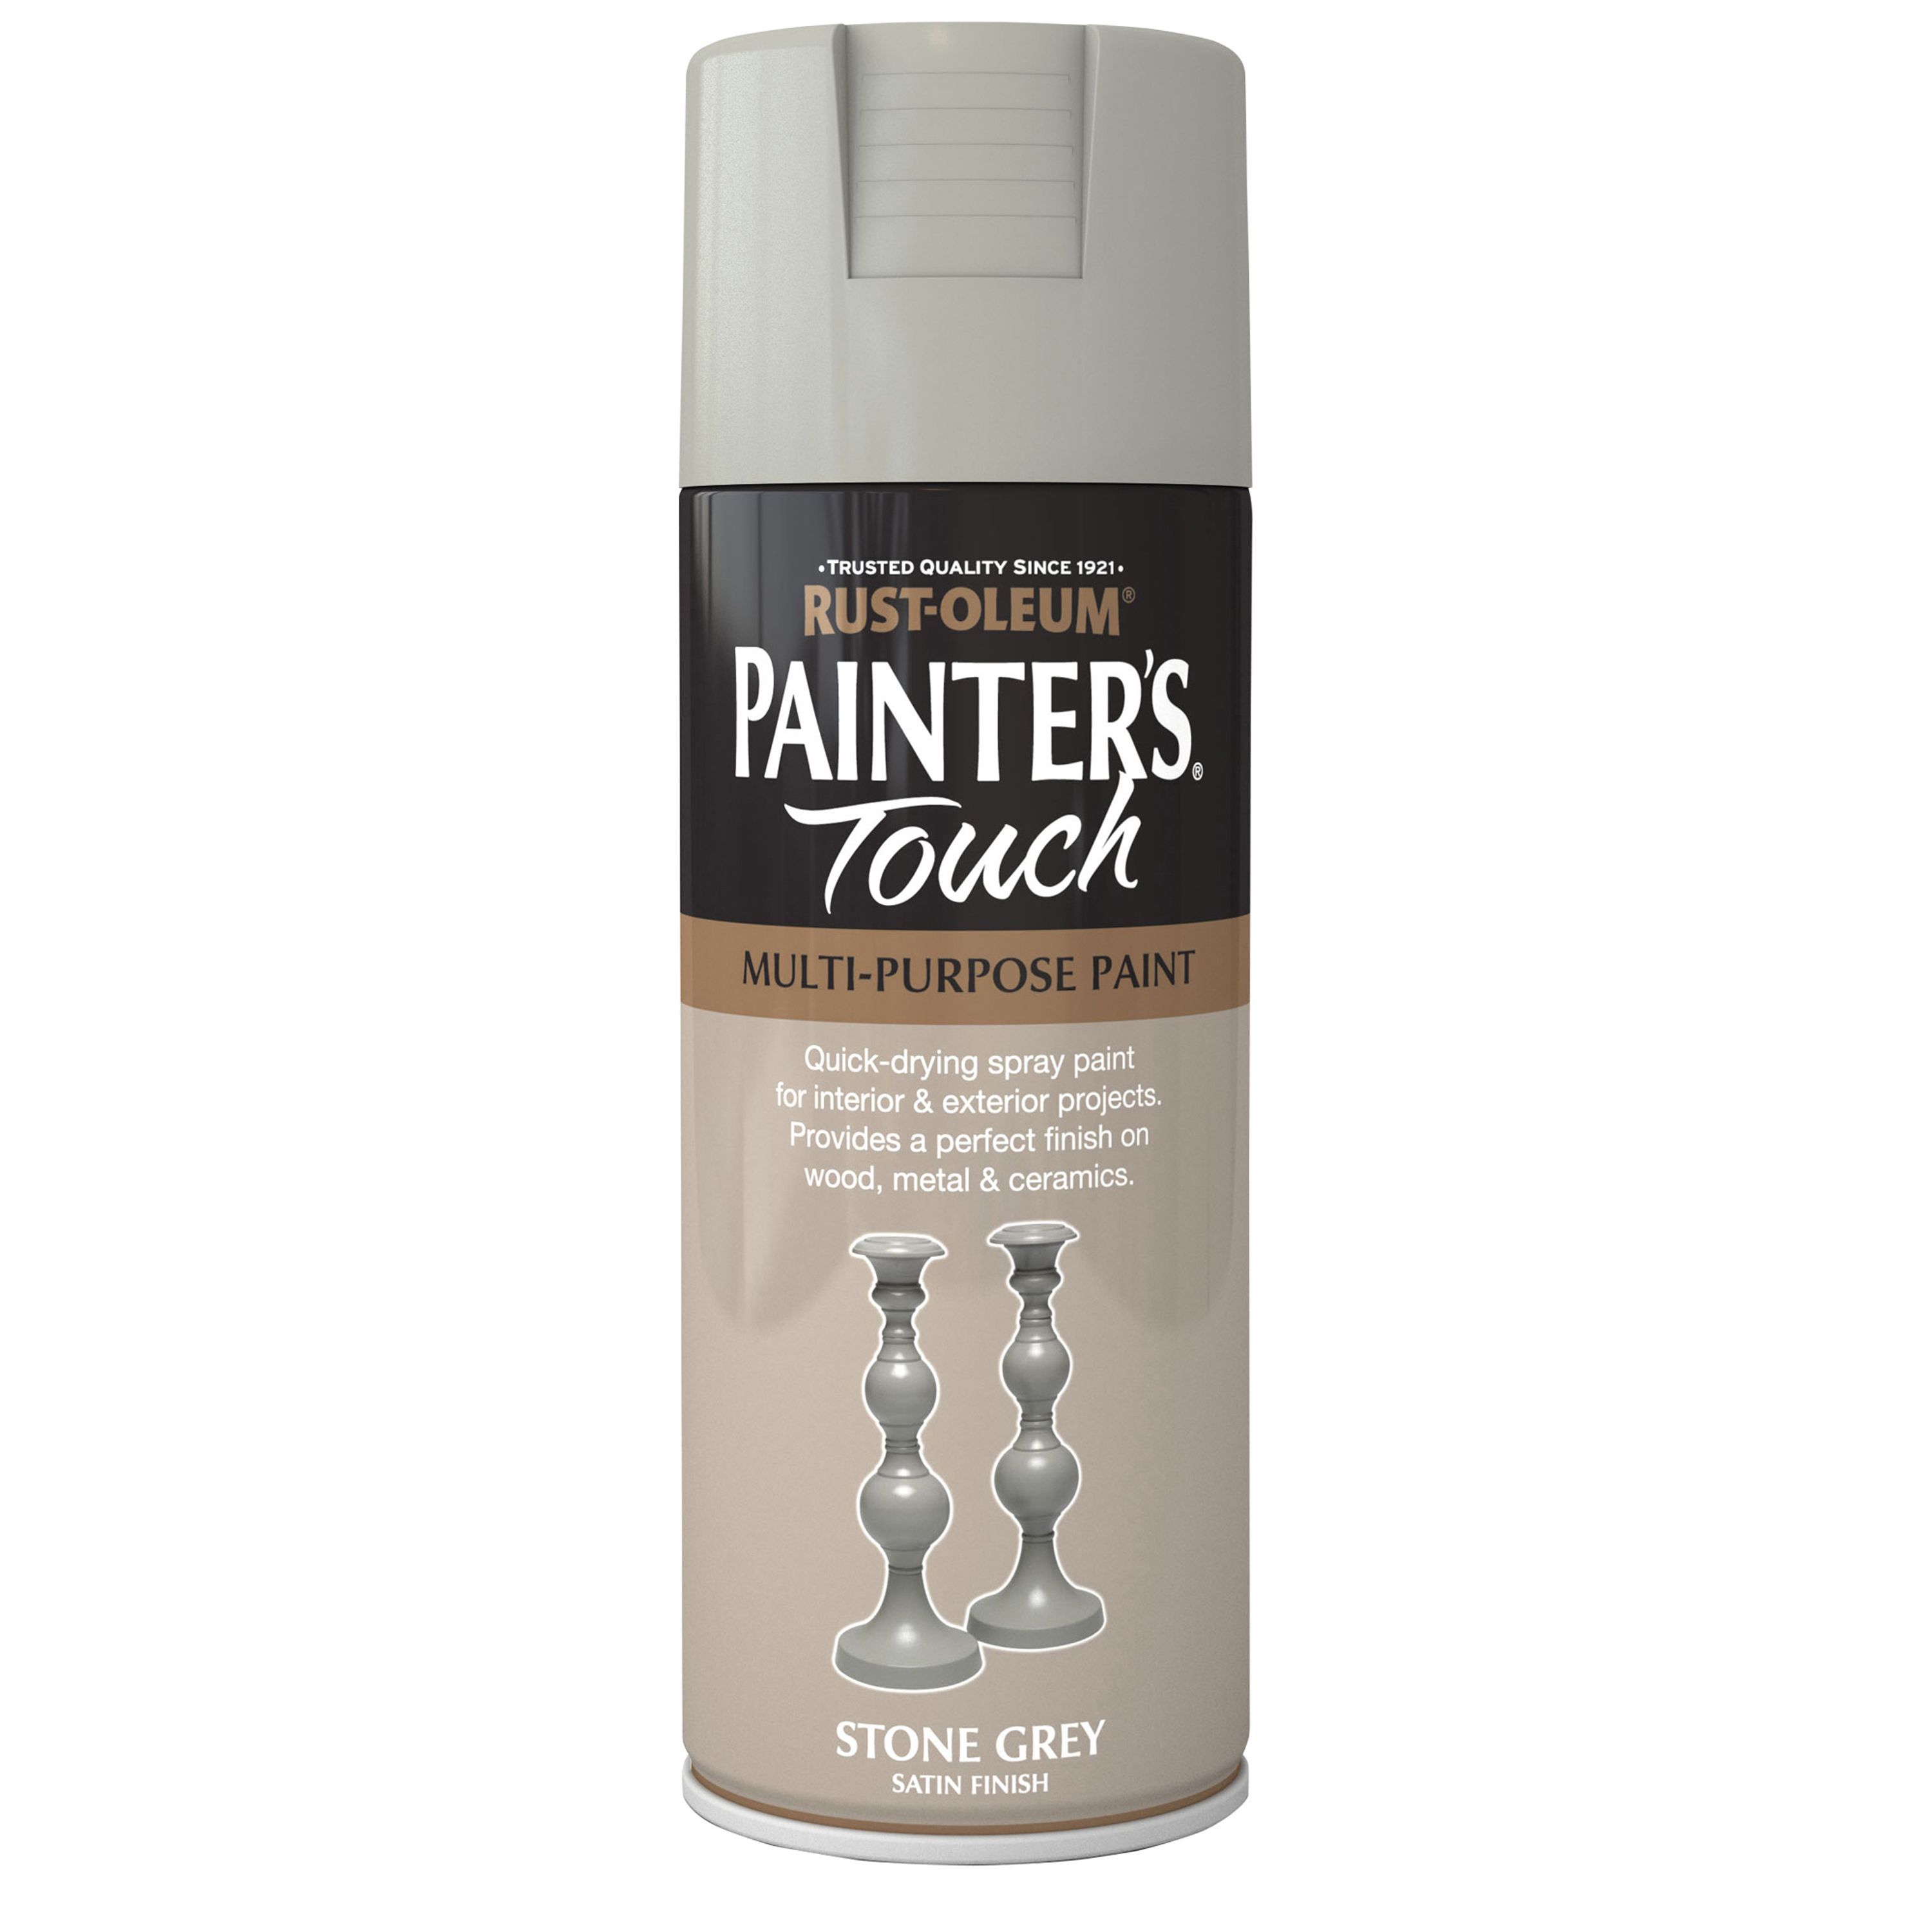 Rust-Oleum Painter's Touch Stone grey Satinwood Multi-surface Decorative spray paint, 400ml